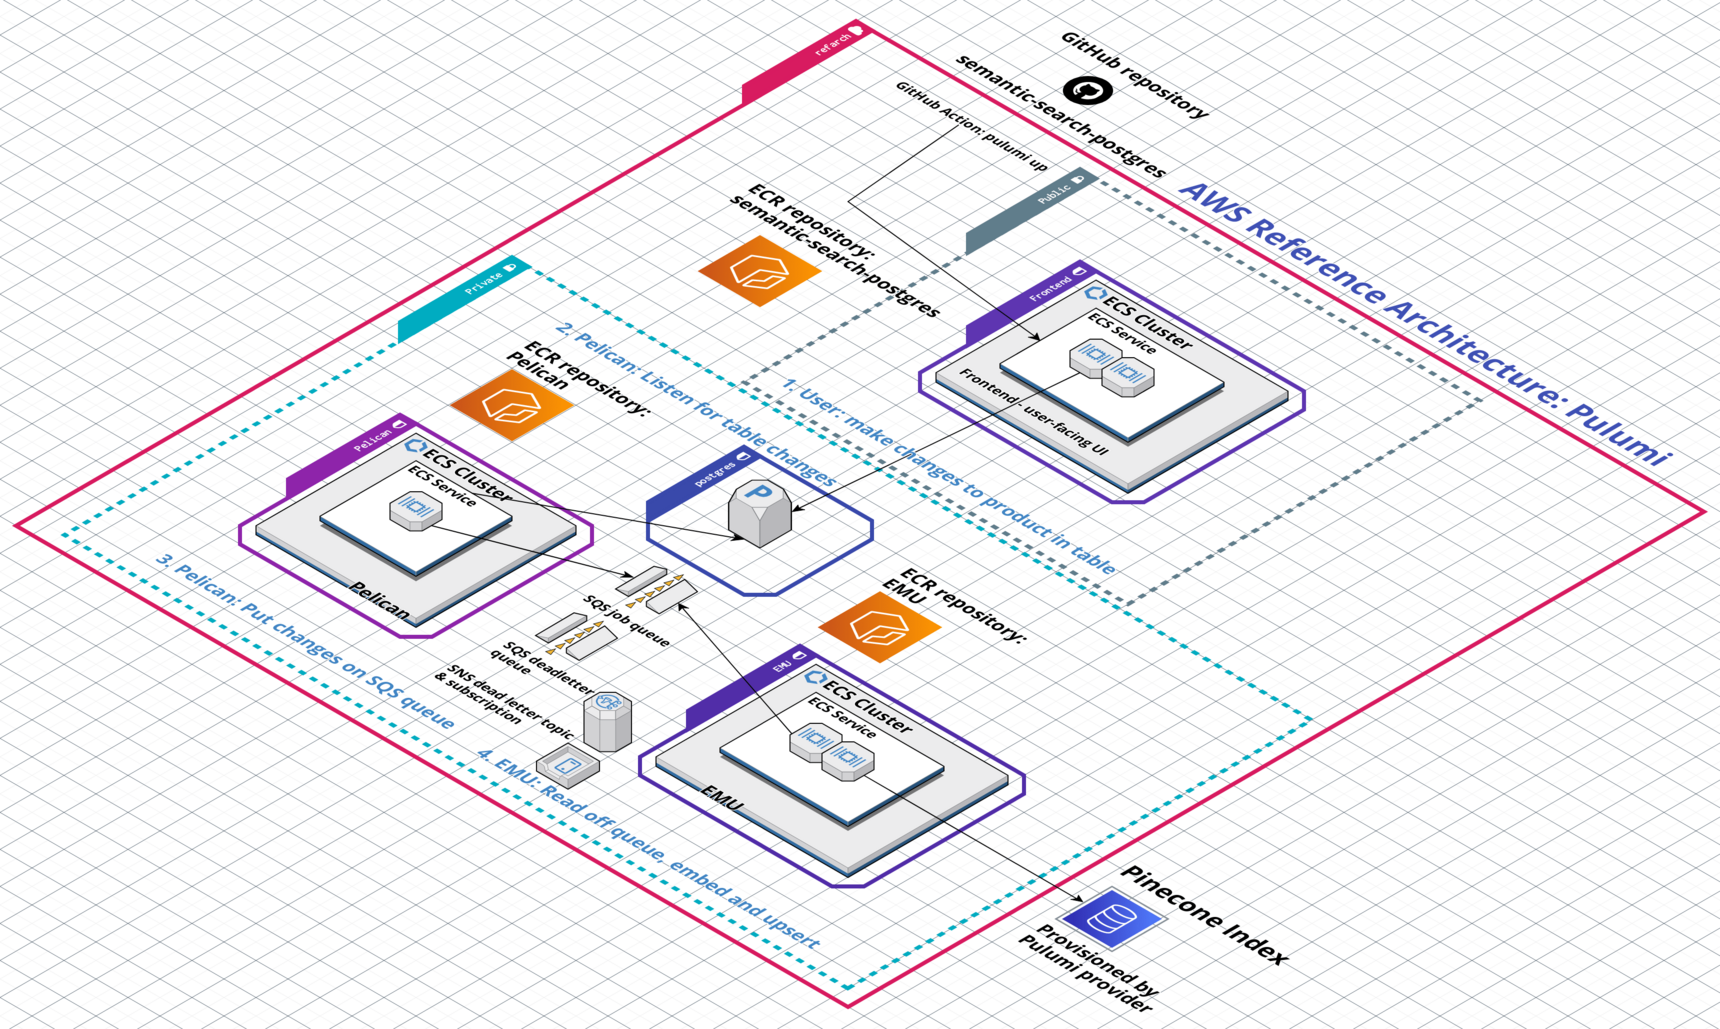 Pinecone's AWS Reference Architecture schematic